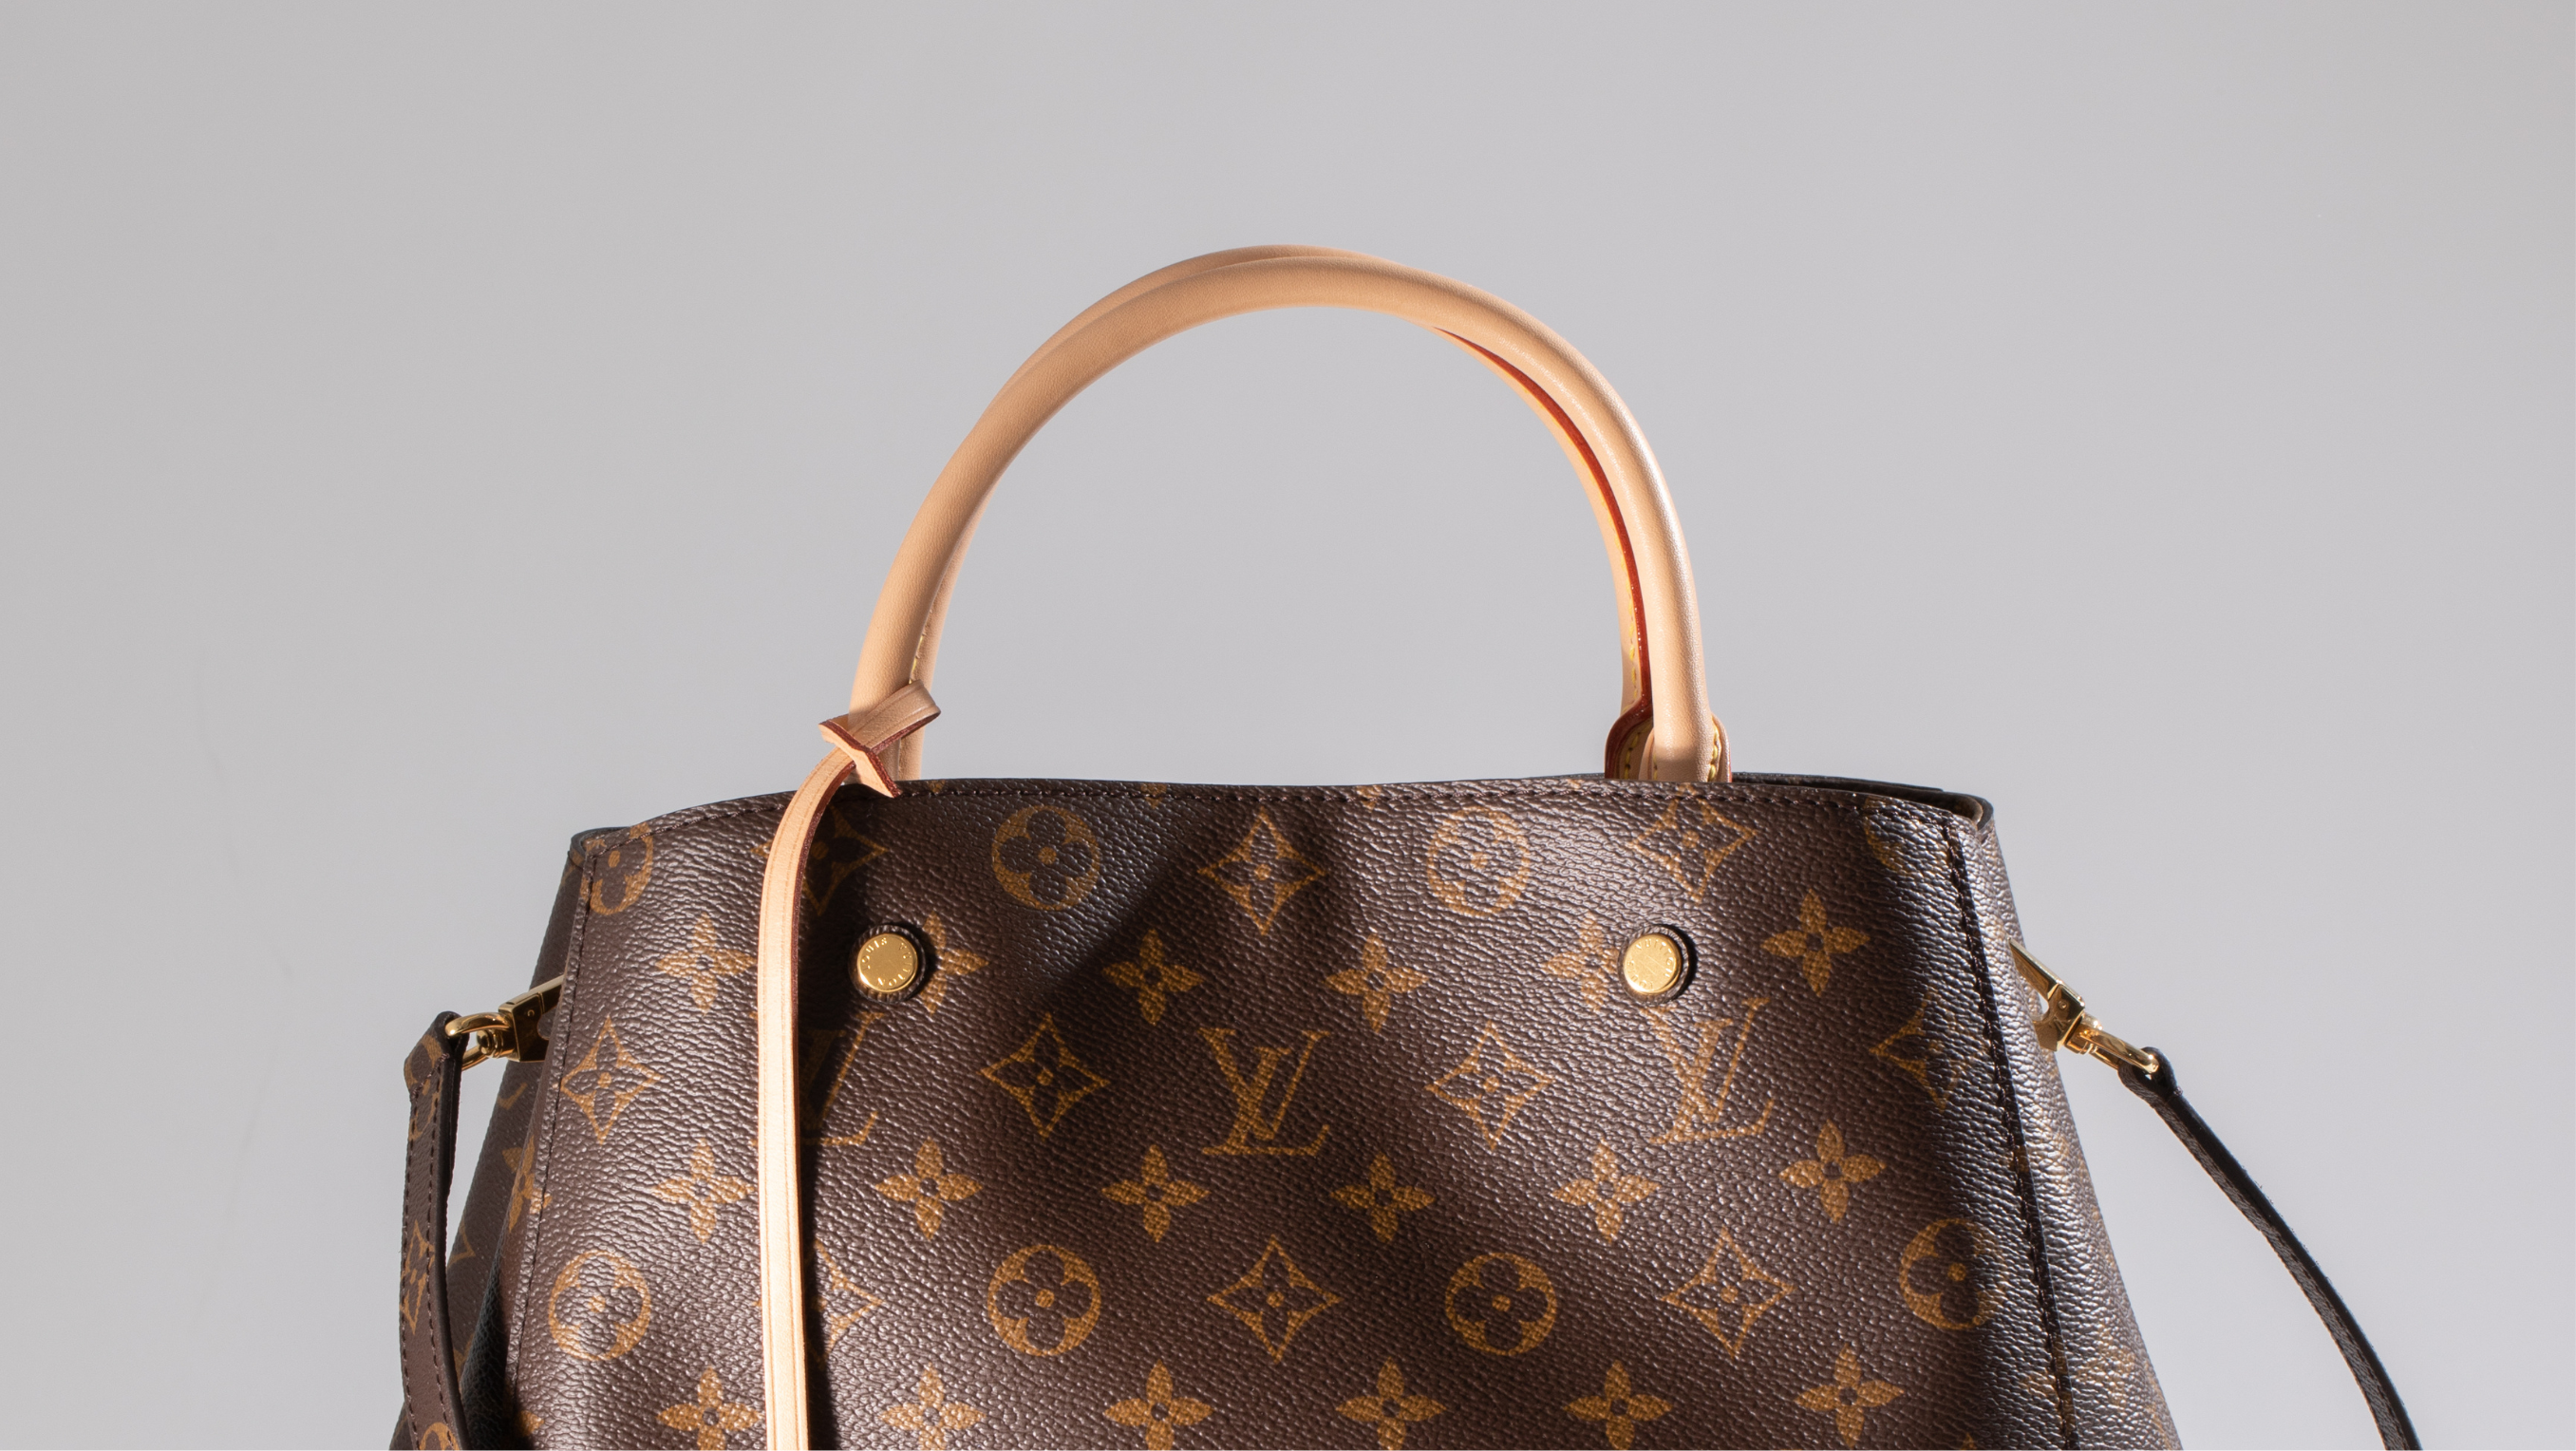 LV Pochette voyage mm monogram! Ideal size for working, traveling and